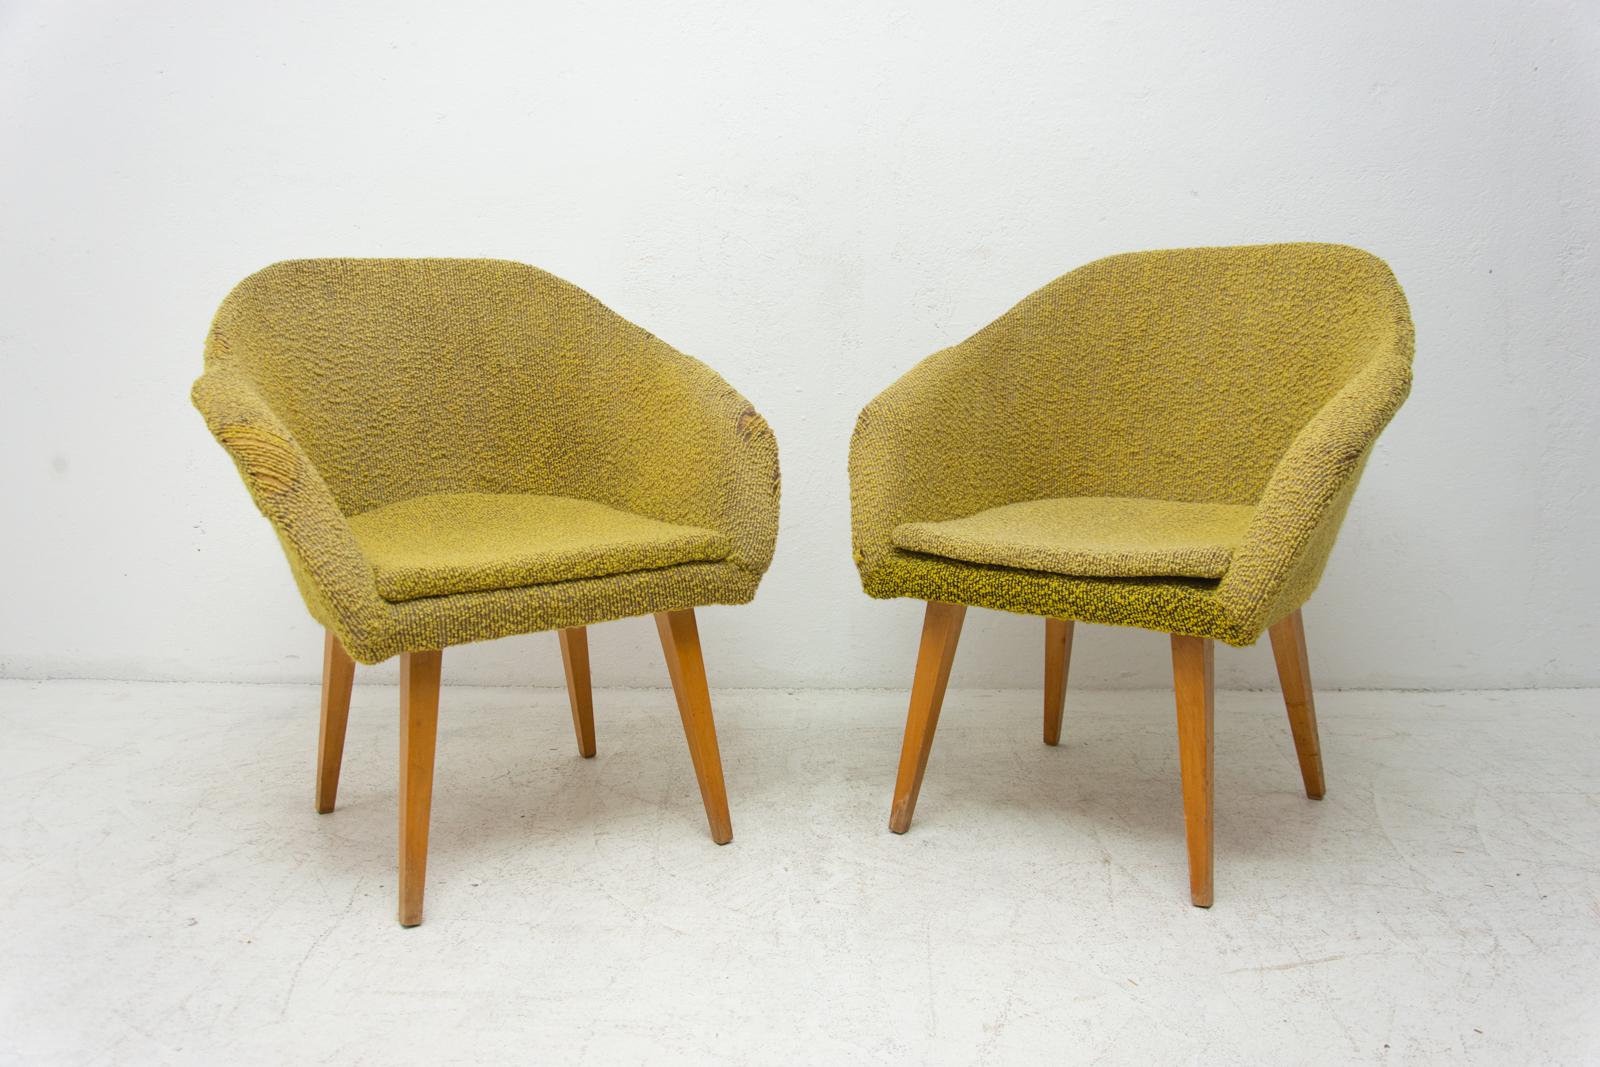 These shell lounge chairs are an interesting example of Czechoslovak midcentury furniture design. They were designed by Miroslav Navratil or František Jirák. They are associated with the “Brussels period” and world-renowned EXPO 58.
The chairs has